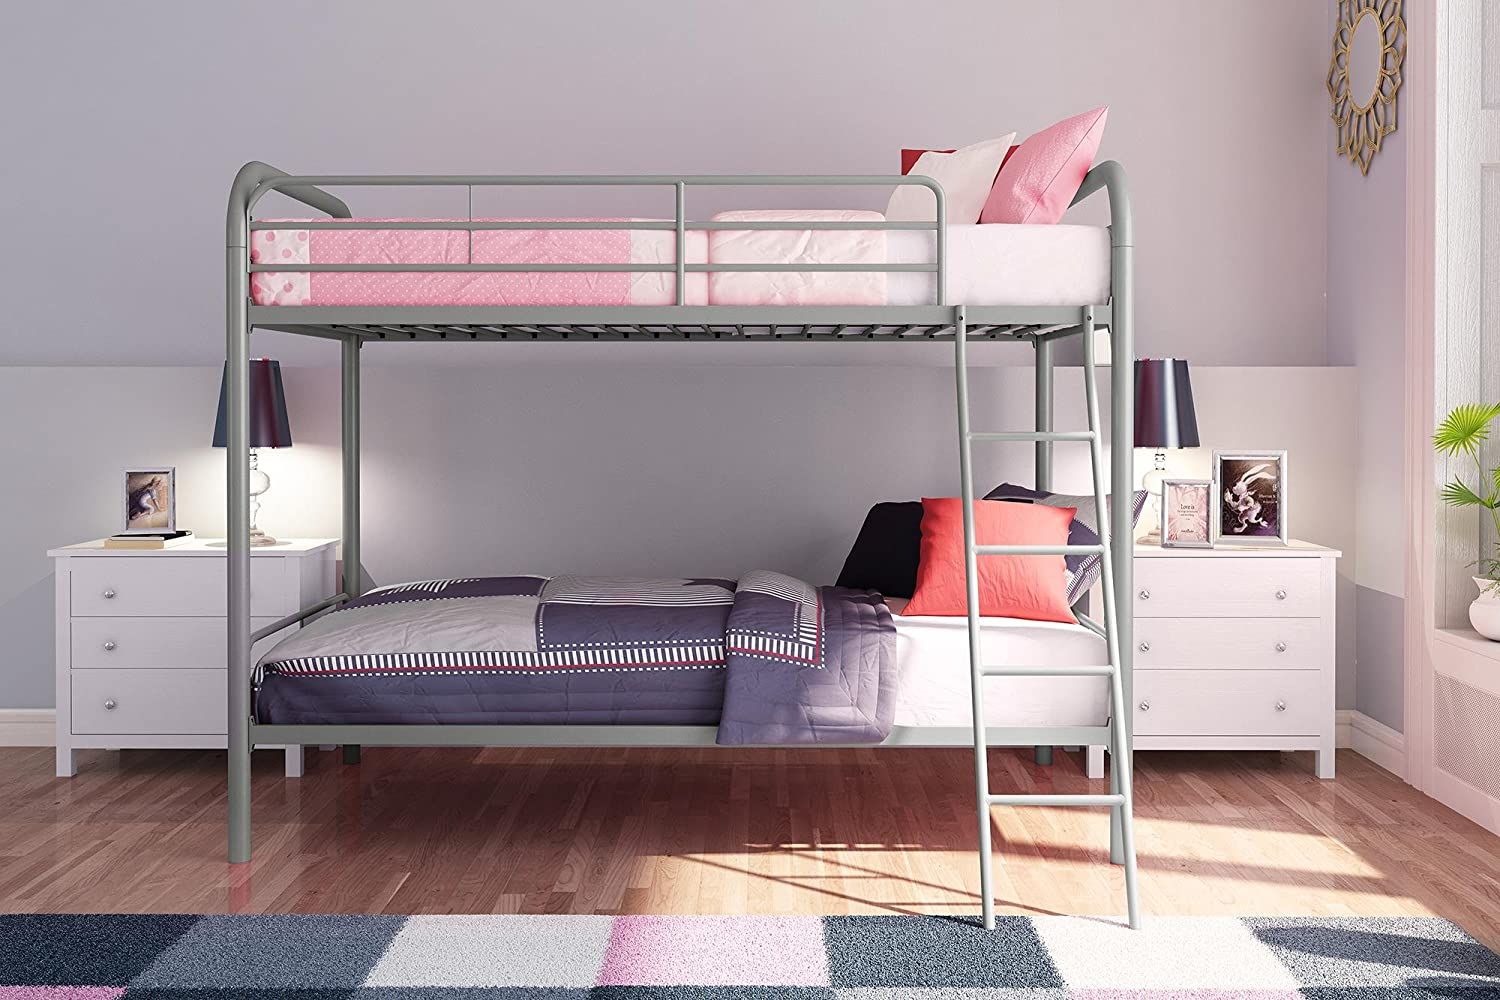 8 Best Bunk Beds 2020 The Strategist, Bunk Beds For Kids Rooms To Go